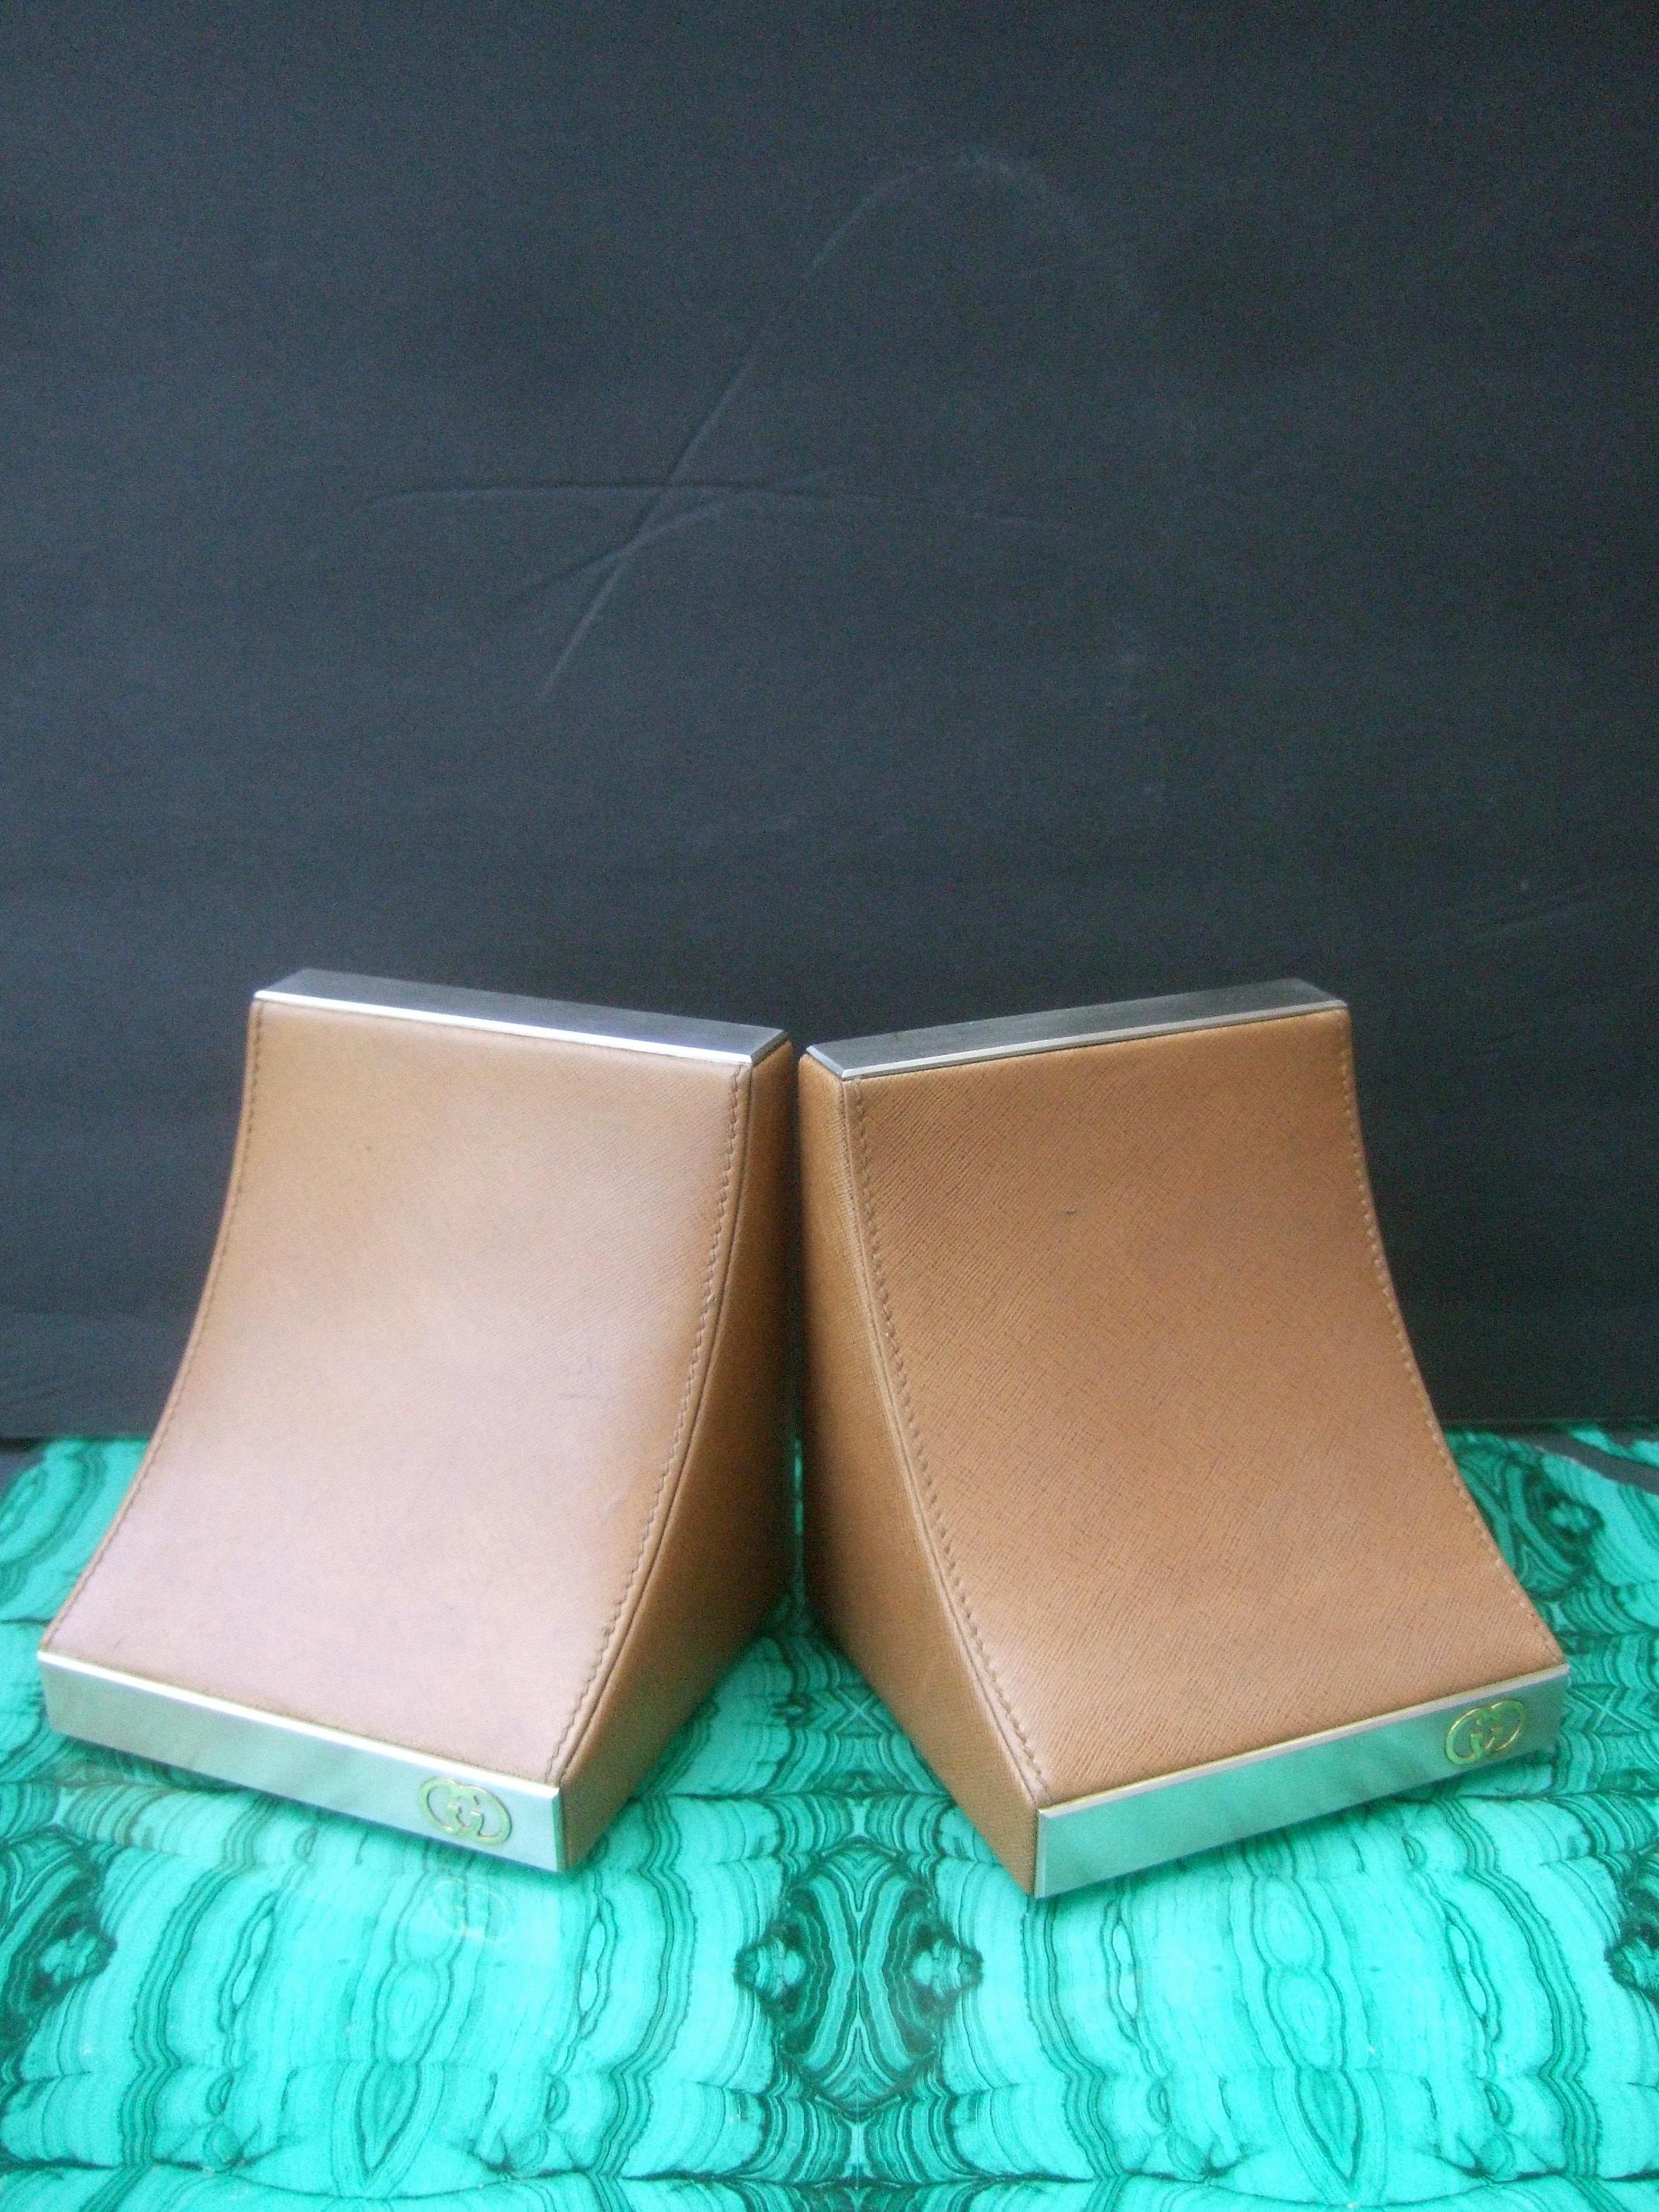 Gucci Italy Rare Caramel Brown Leather Pair of Bookends c 1970s  In Good Condition In University City, MO